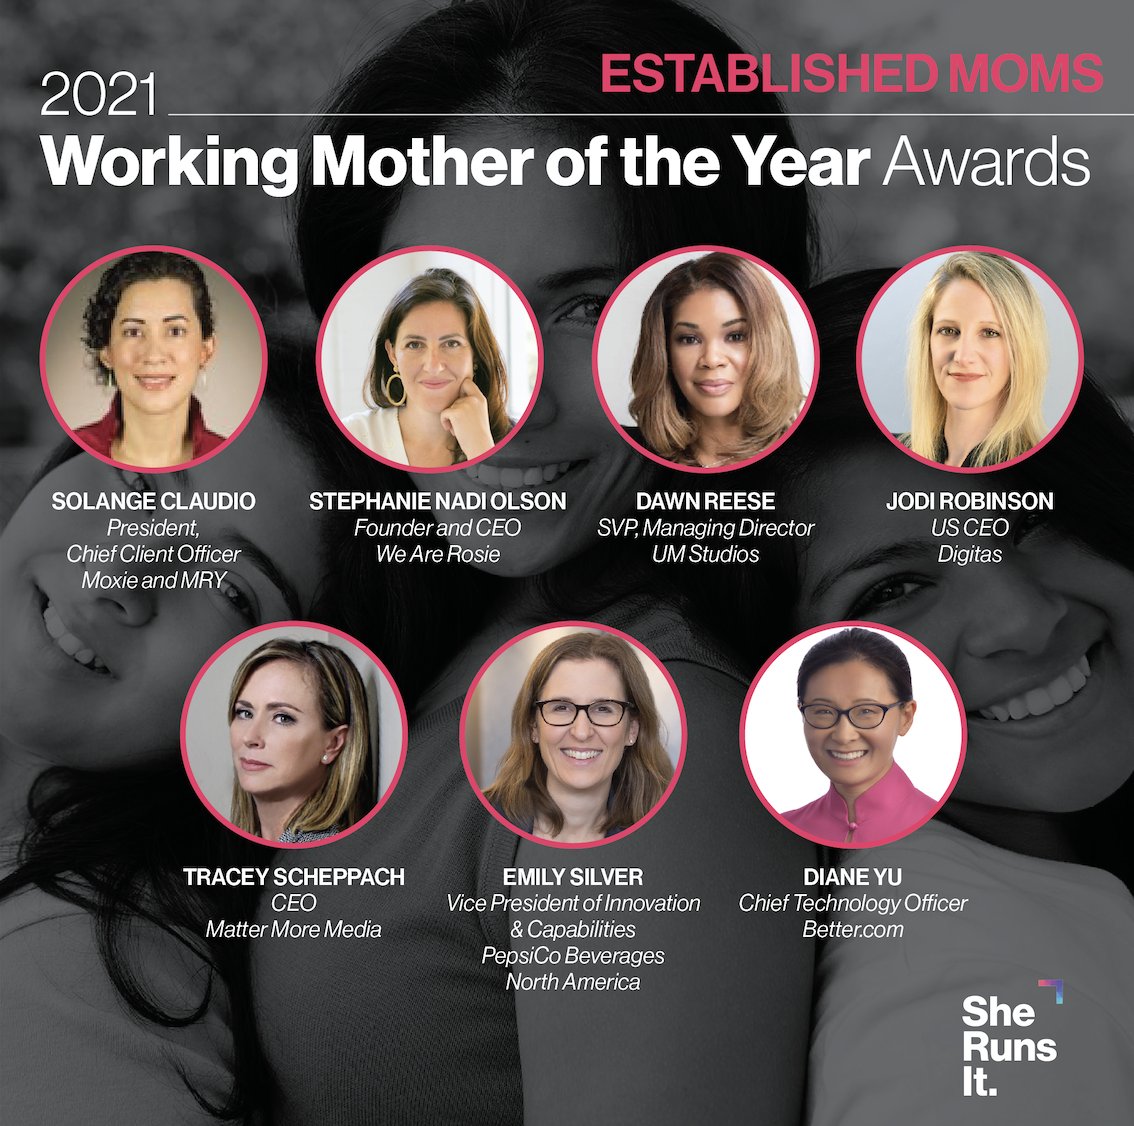 Founder Stephanie Nadi Olson, 2021 Working Mother of the Year Awards